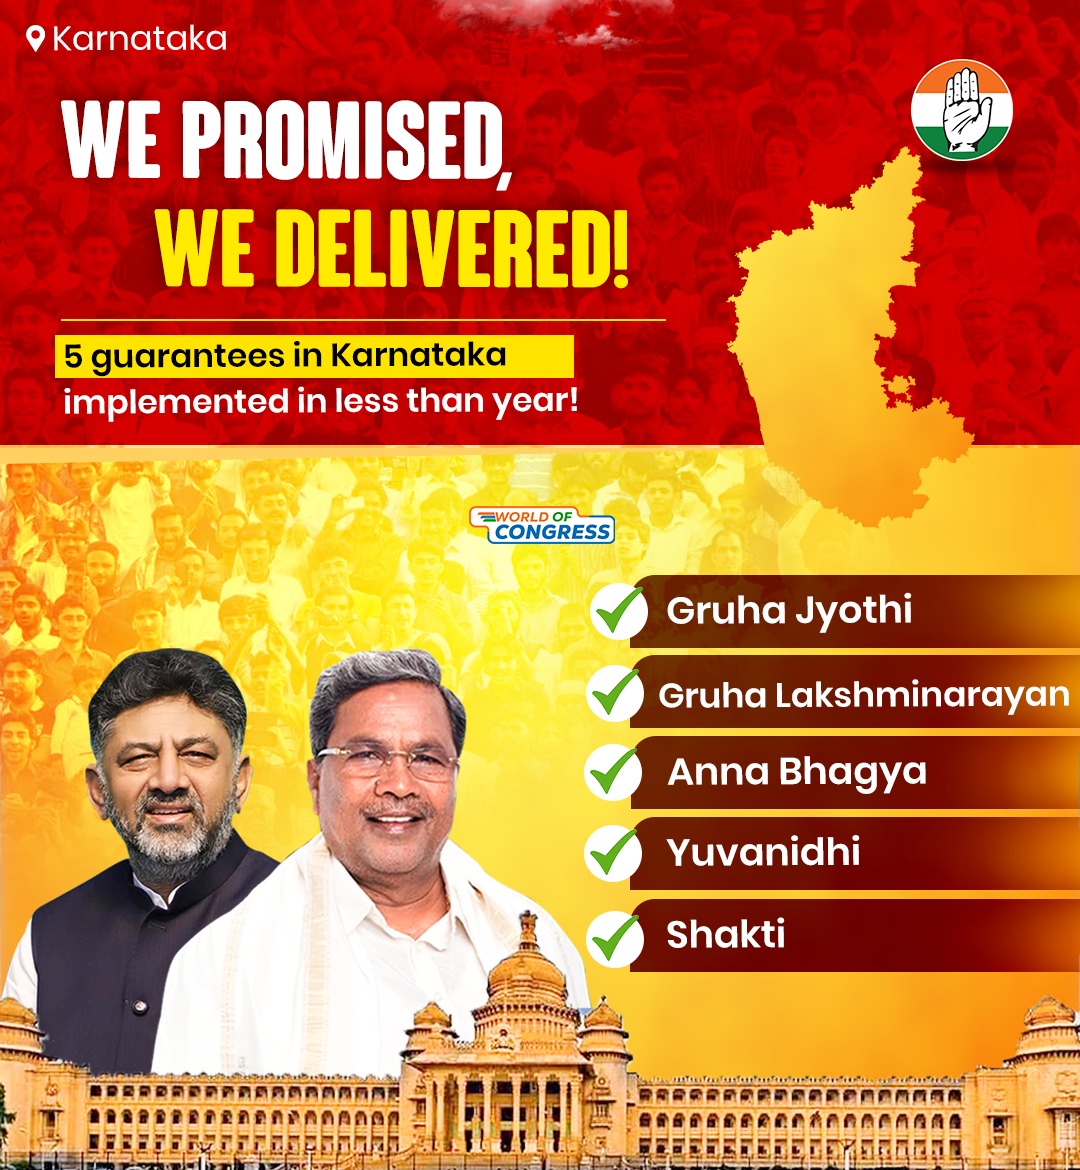 Karnataka Congress gov delivered all the 5 promises they promised in the Elections.

 ➡️Gruha Jyothi

 ➡️ Gruha Lakshminarayan

 ➡️ Anna Bhagya

 ➡️ Yuvanidhi

 ➡️ Shakti 

The Congress does what it says. 🔥✊